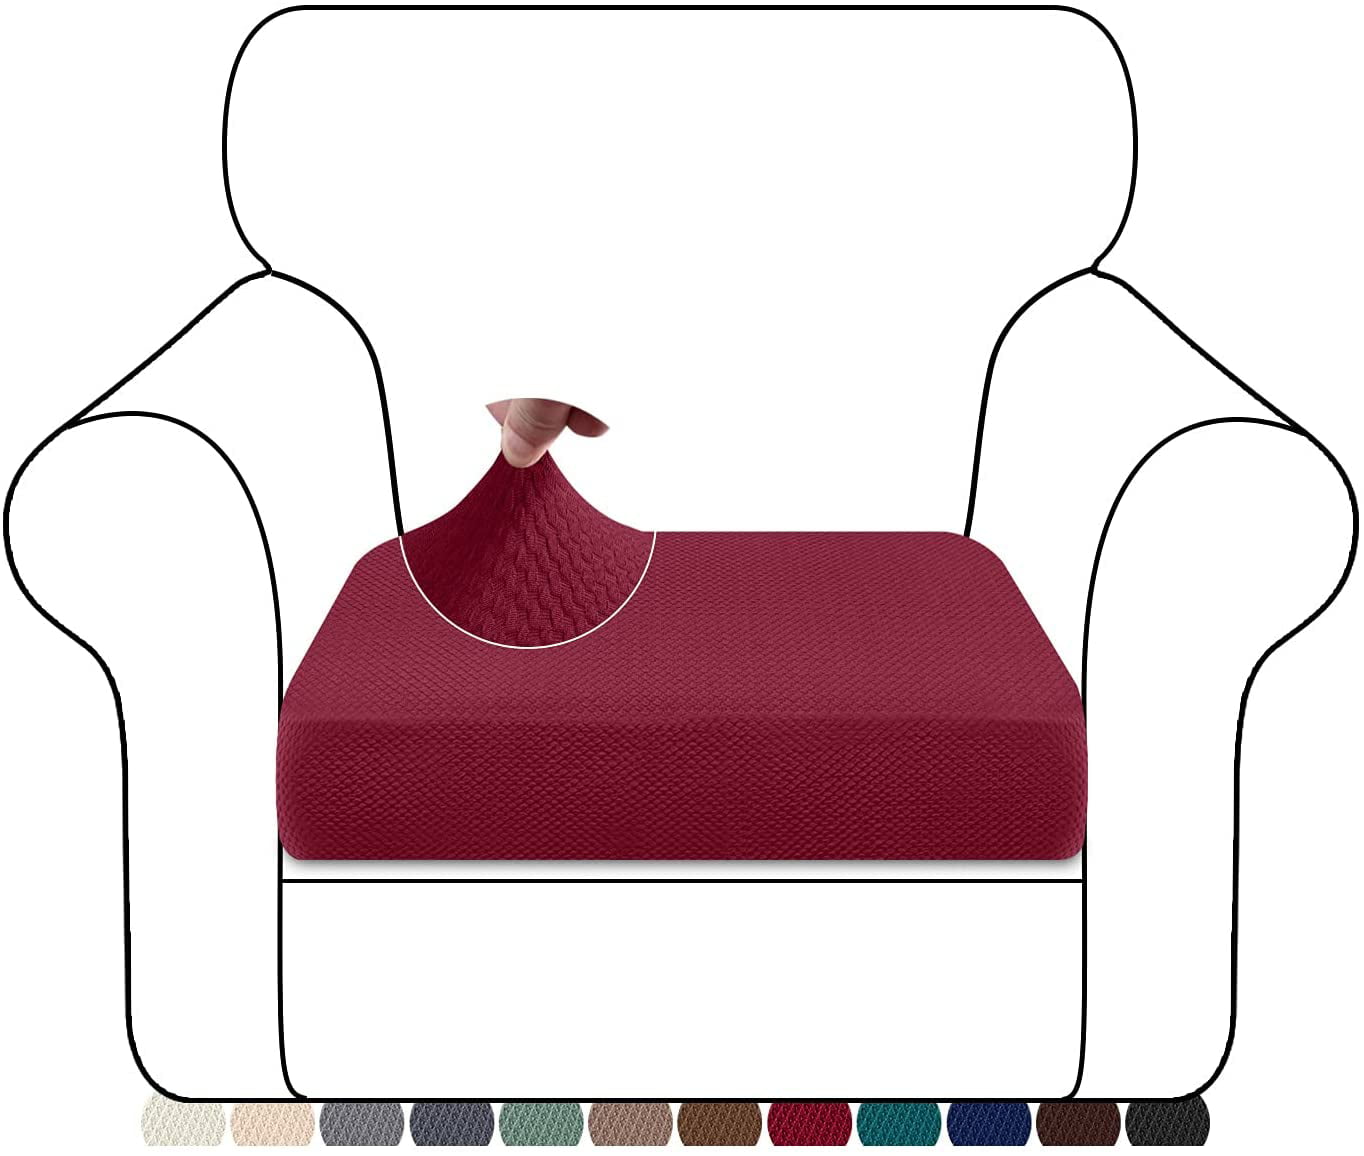 Details about   Sofa Slipcover Protector Jacquard Seat Cushion Cover Removable Funiture Home New